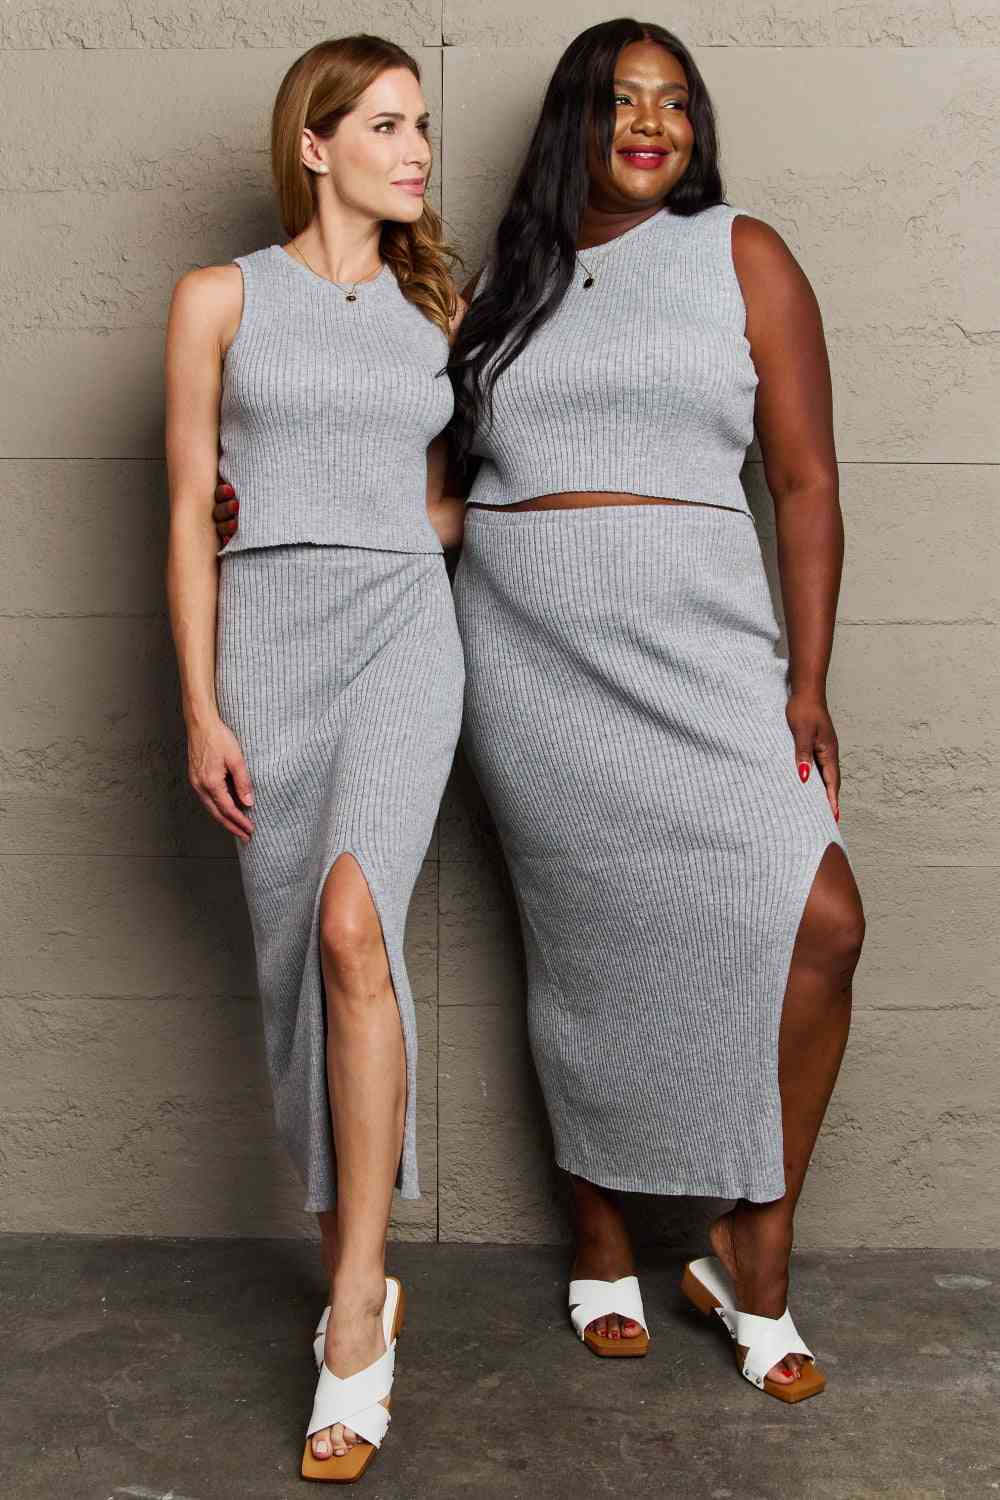 Sew In Love She's All That Fitted Two-Piece Skirt SetSew In Love She's All That Fitted Two-Piece Skirt Set: A Chic Ensemble